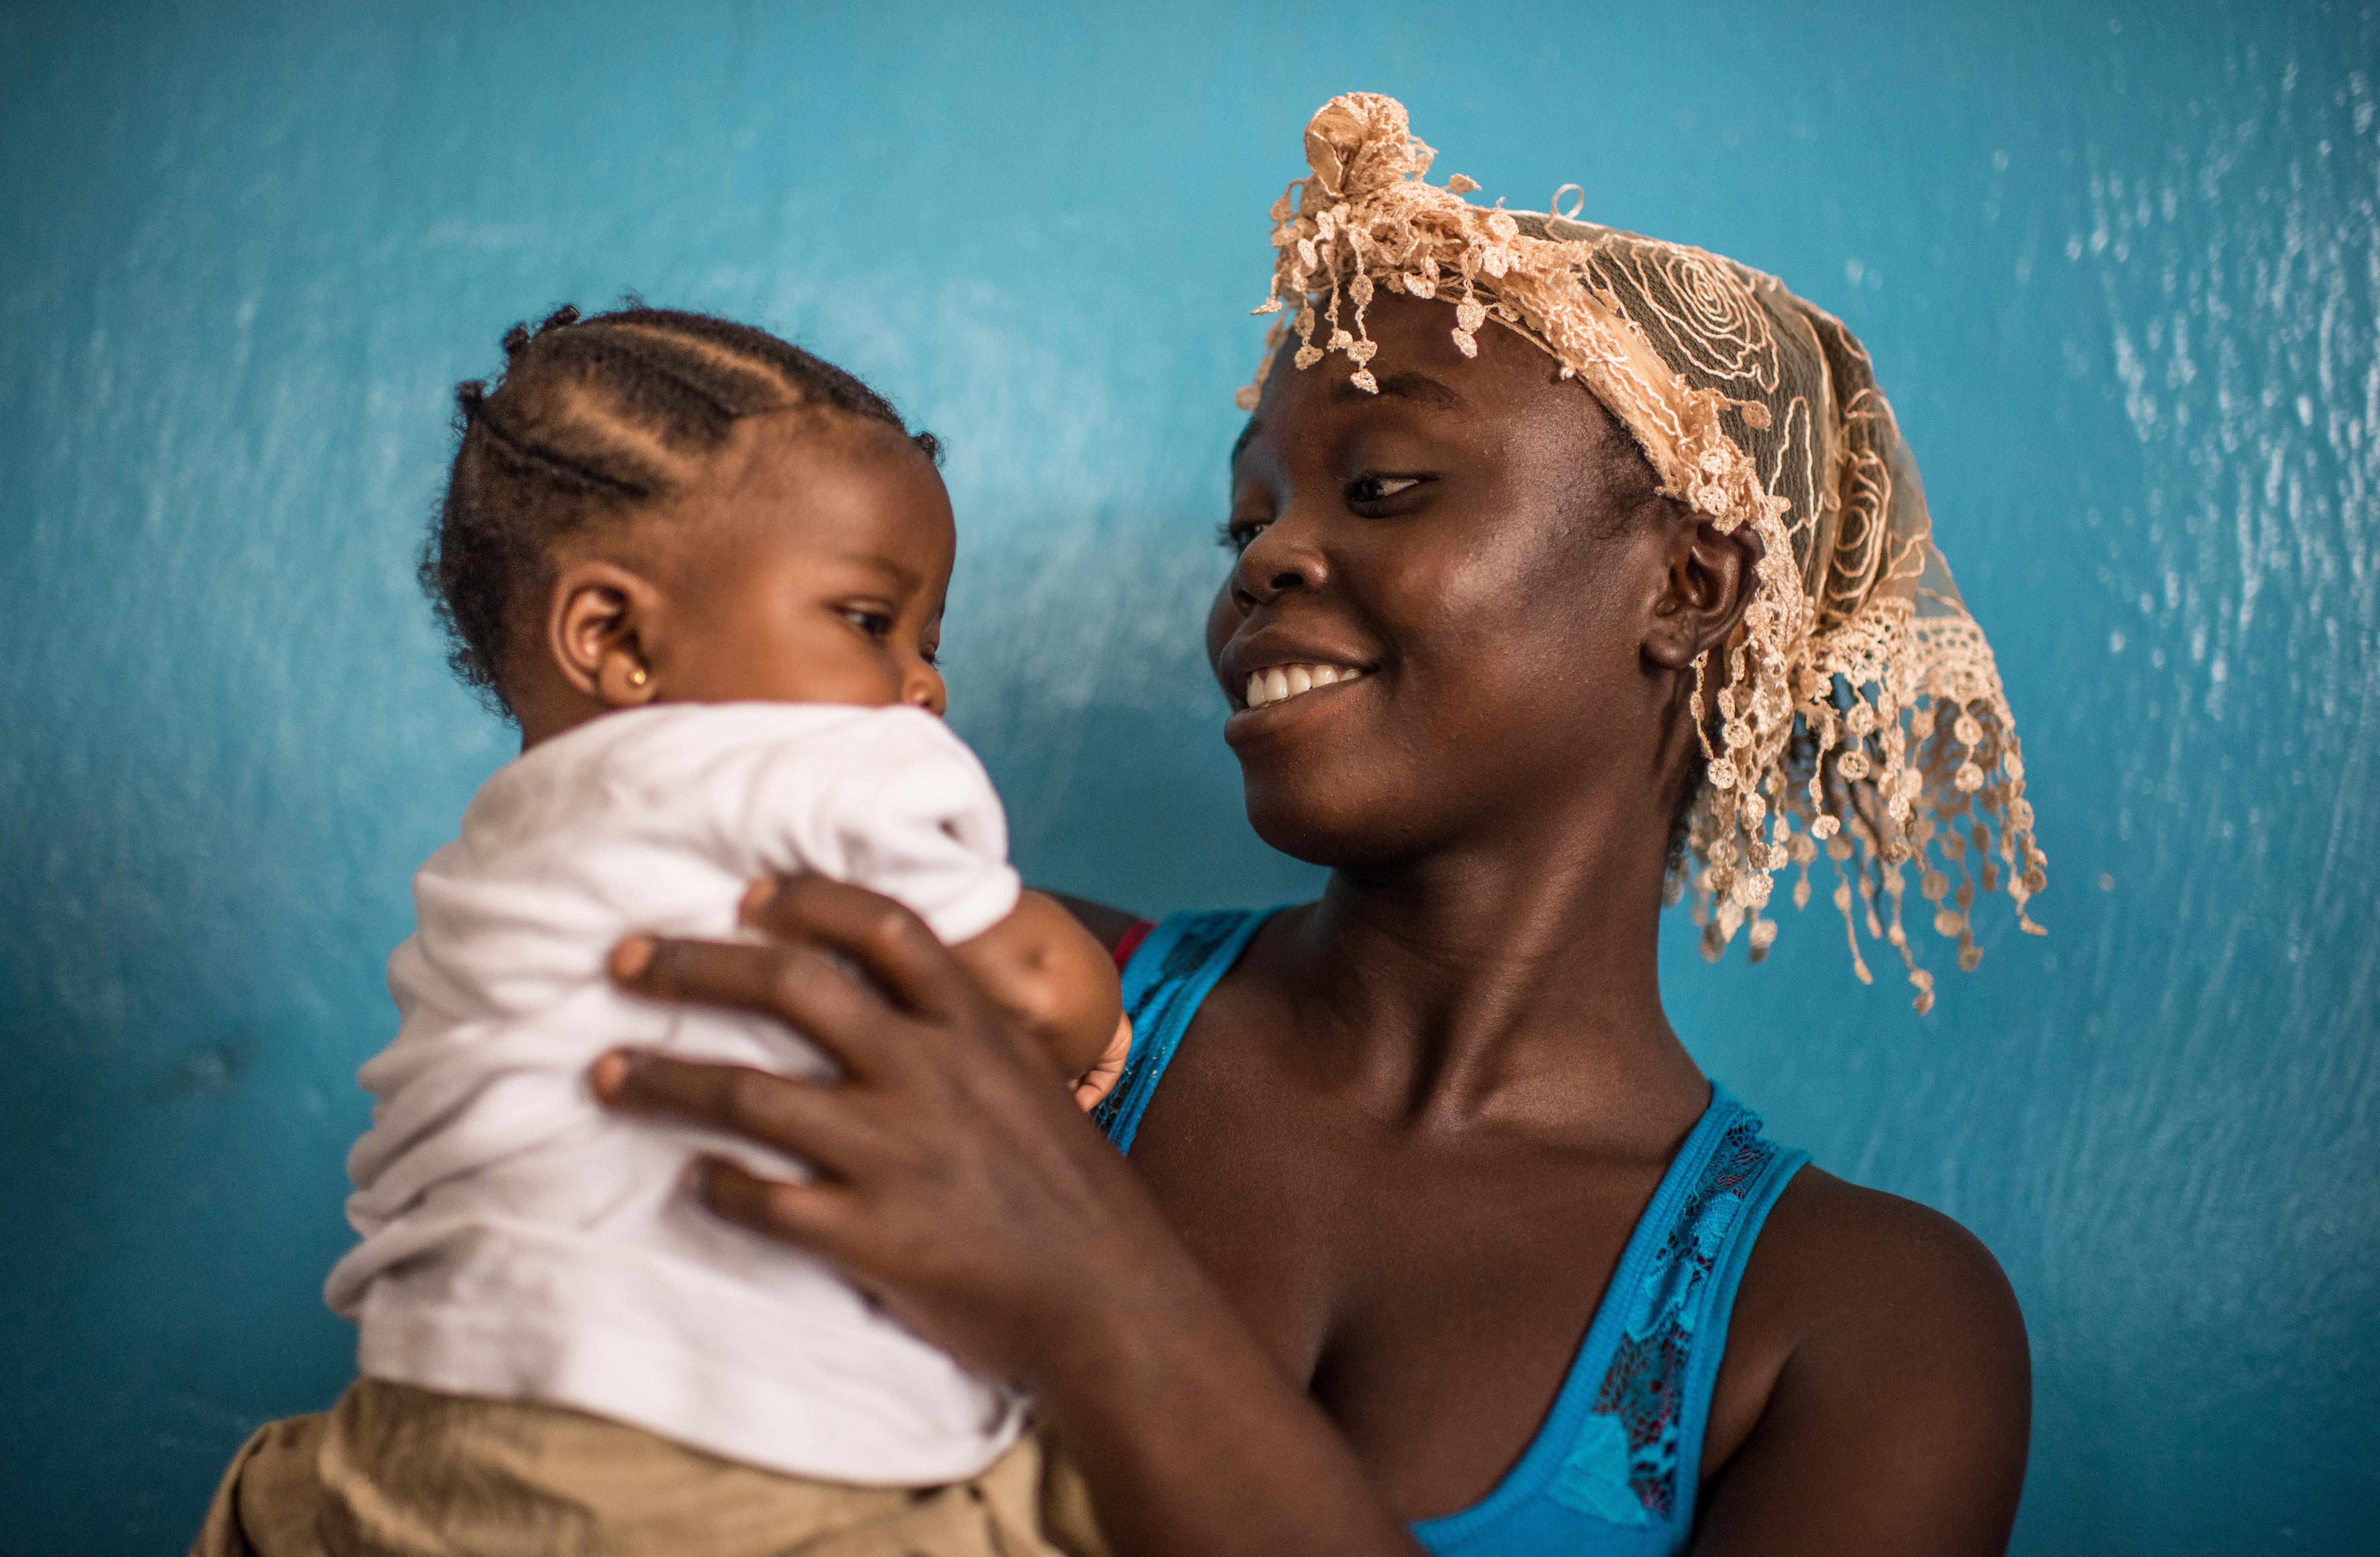 20-year-old Gborlu Koiwo delivered her healthy baby, Mamie, at IRC-supported Konia Health Centre in Lofa County, Liberia